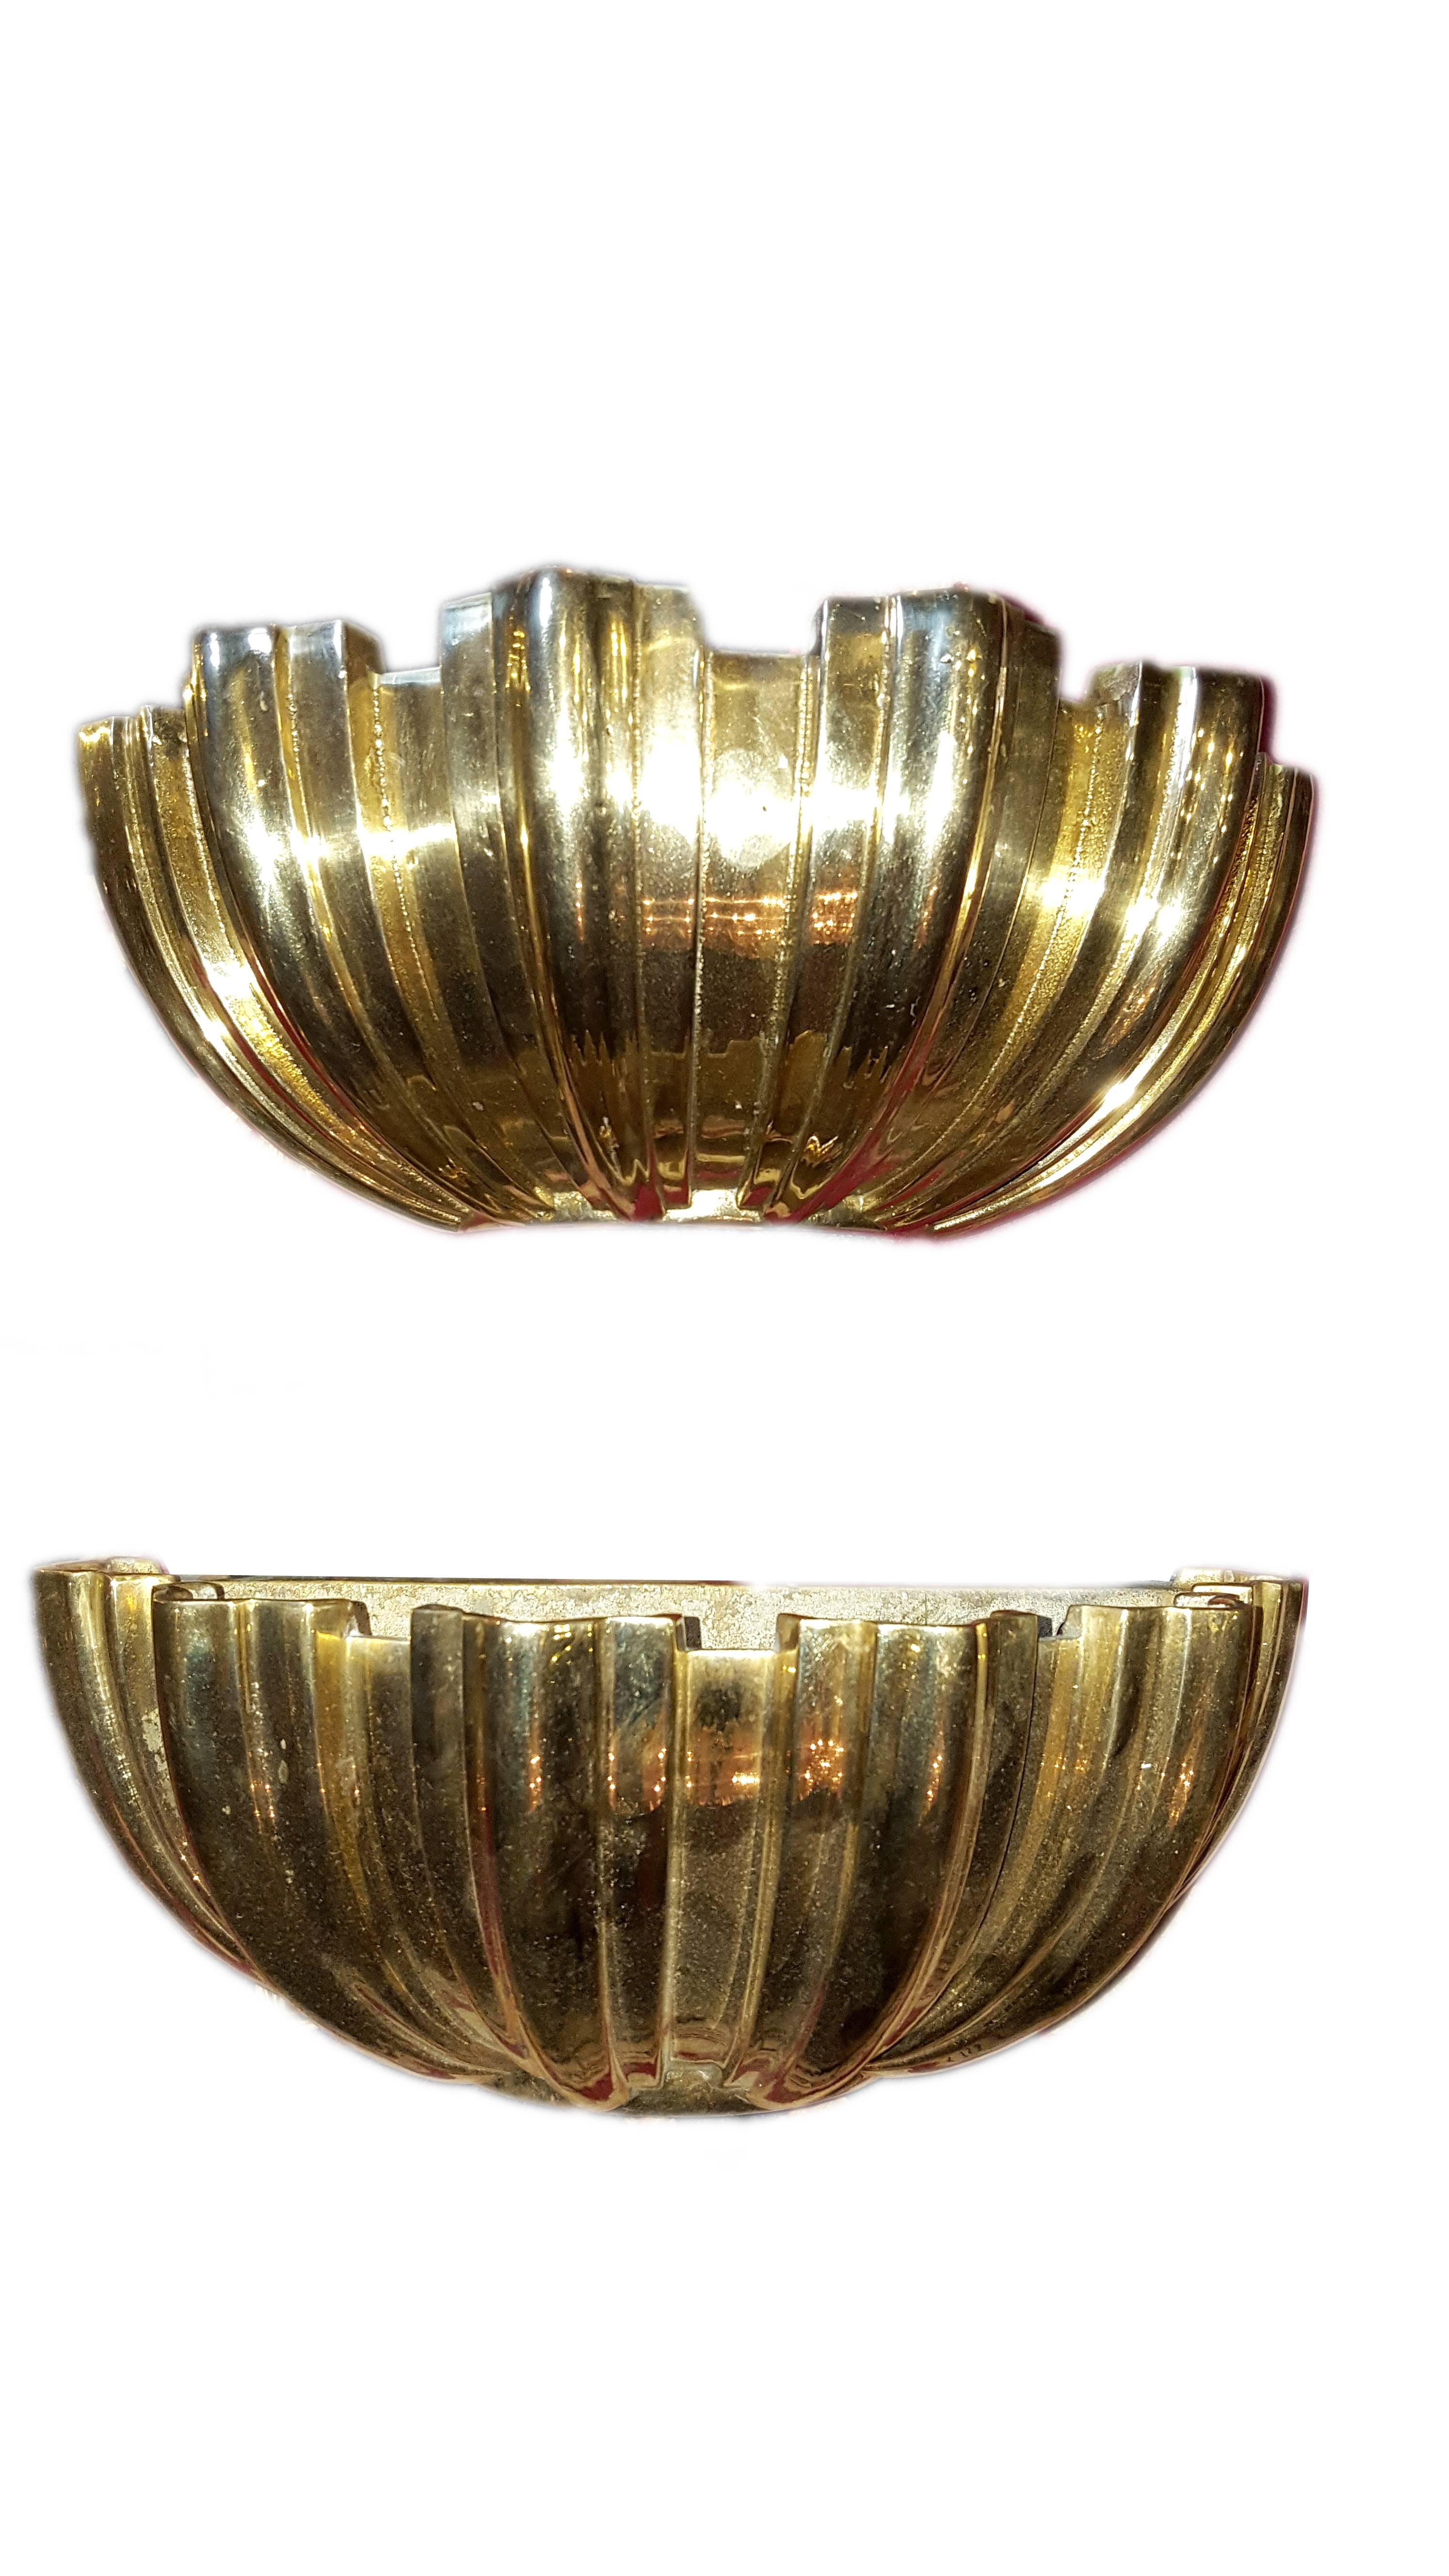 Set of 4 1940s American gilt bronze shell shaped sconces with interior light.

Measurements:
Width 12.25?
Height 5?
Depth 6.25?.